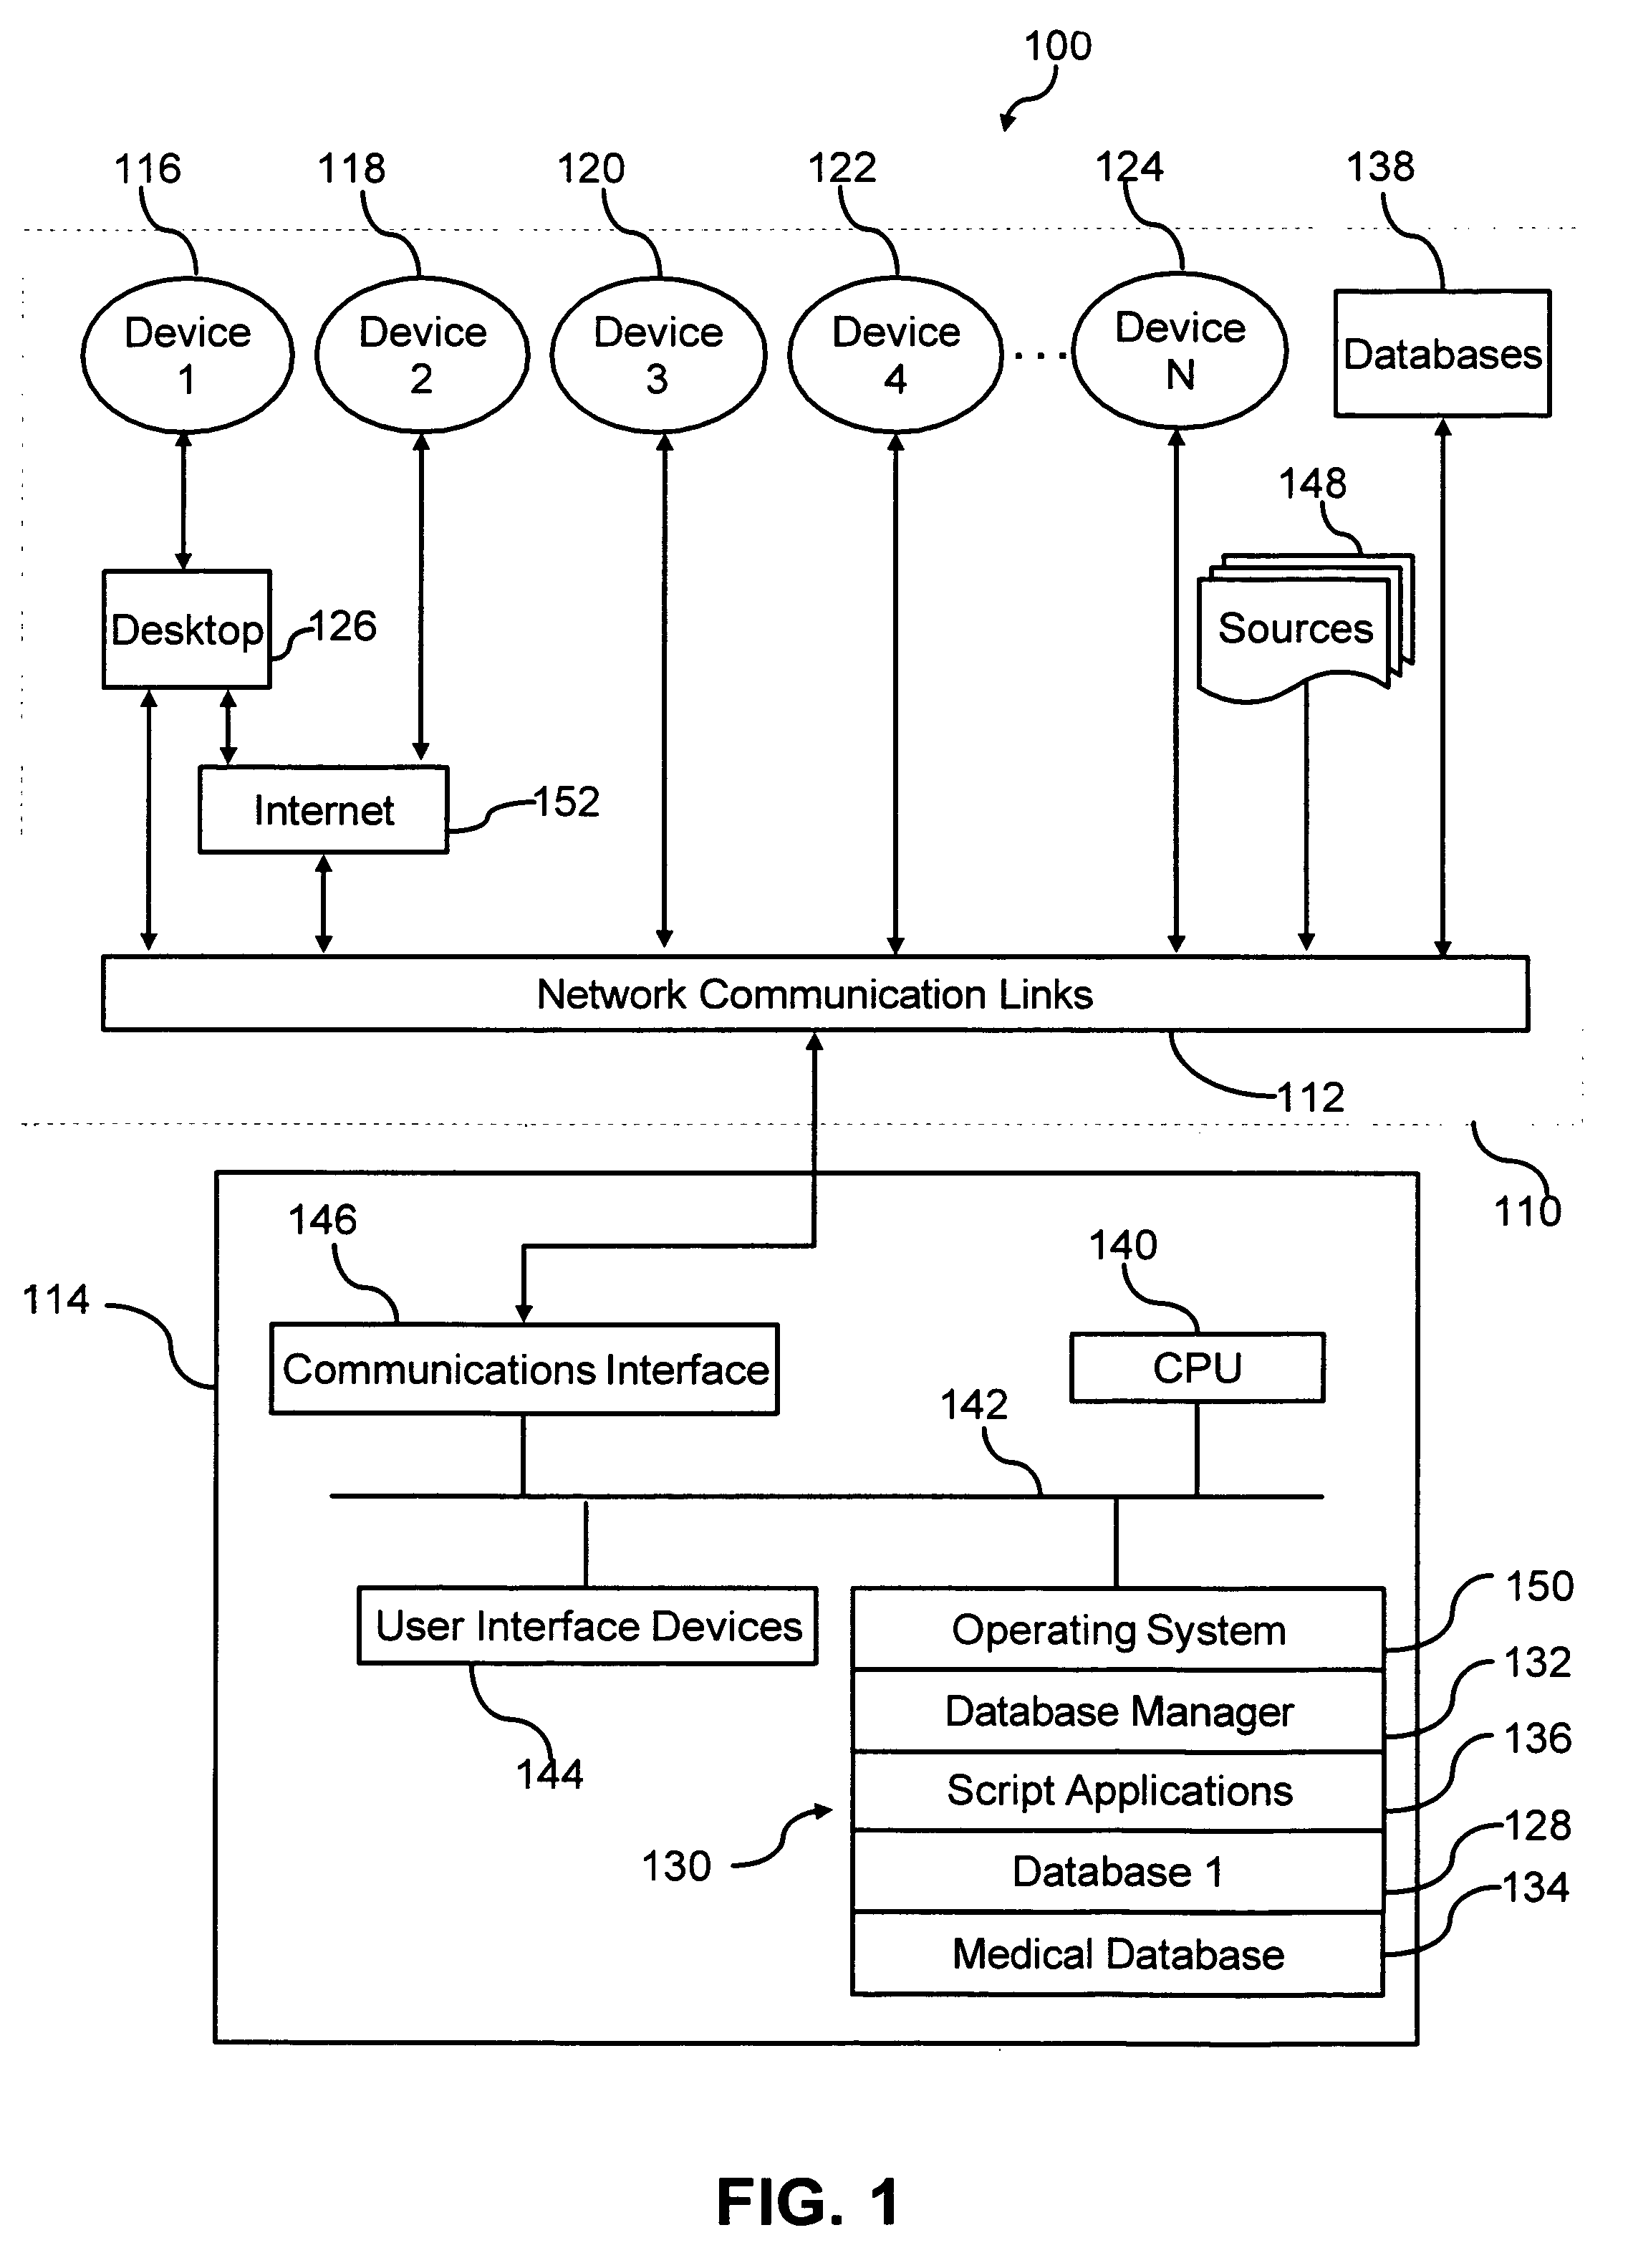 Method and system for providing current industry specific data to physicians